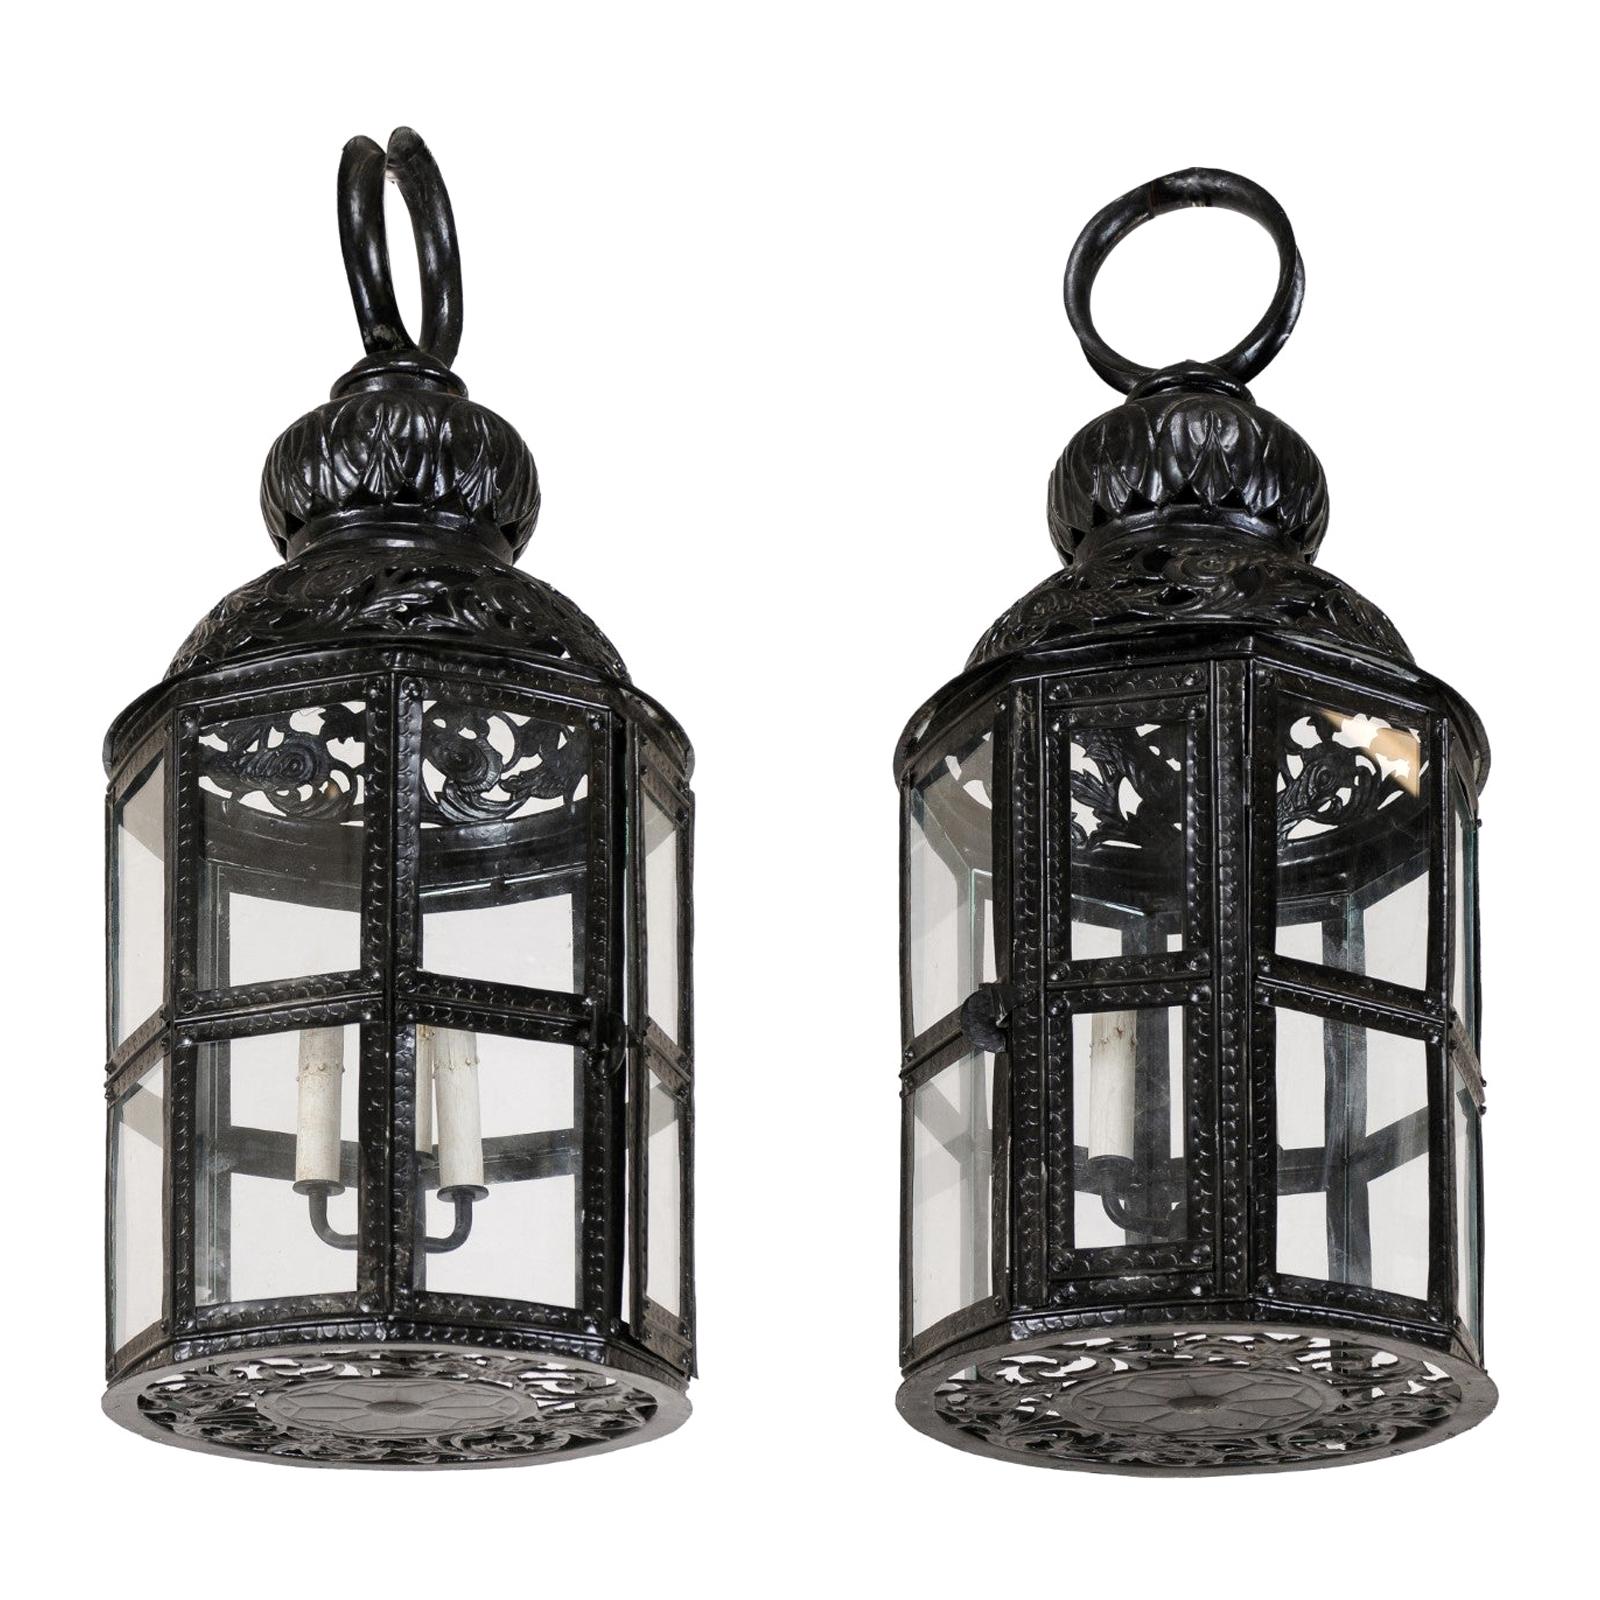 Pair of Three-Light Moroccan-Inspired European Lanterns in Black Color w/Glass